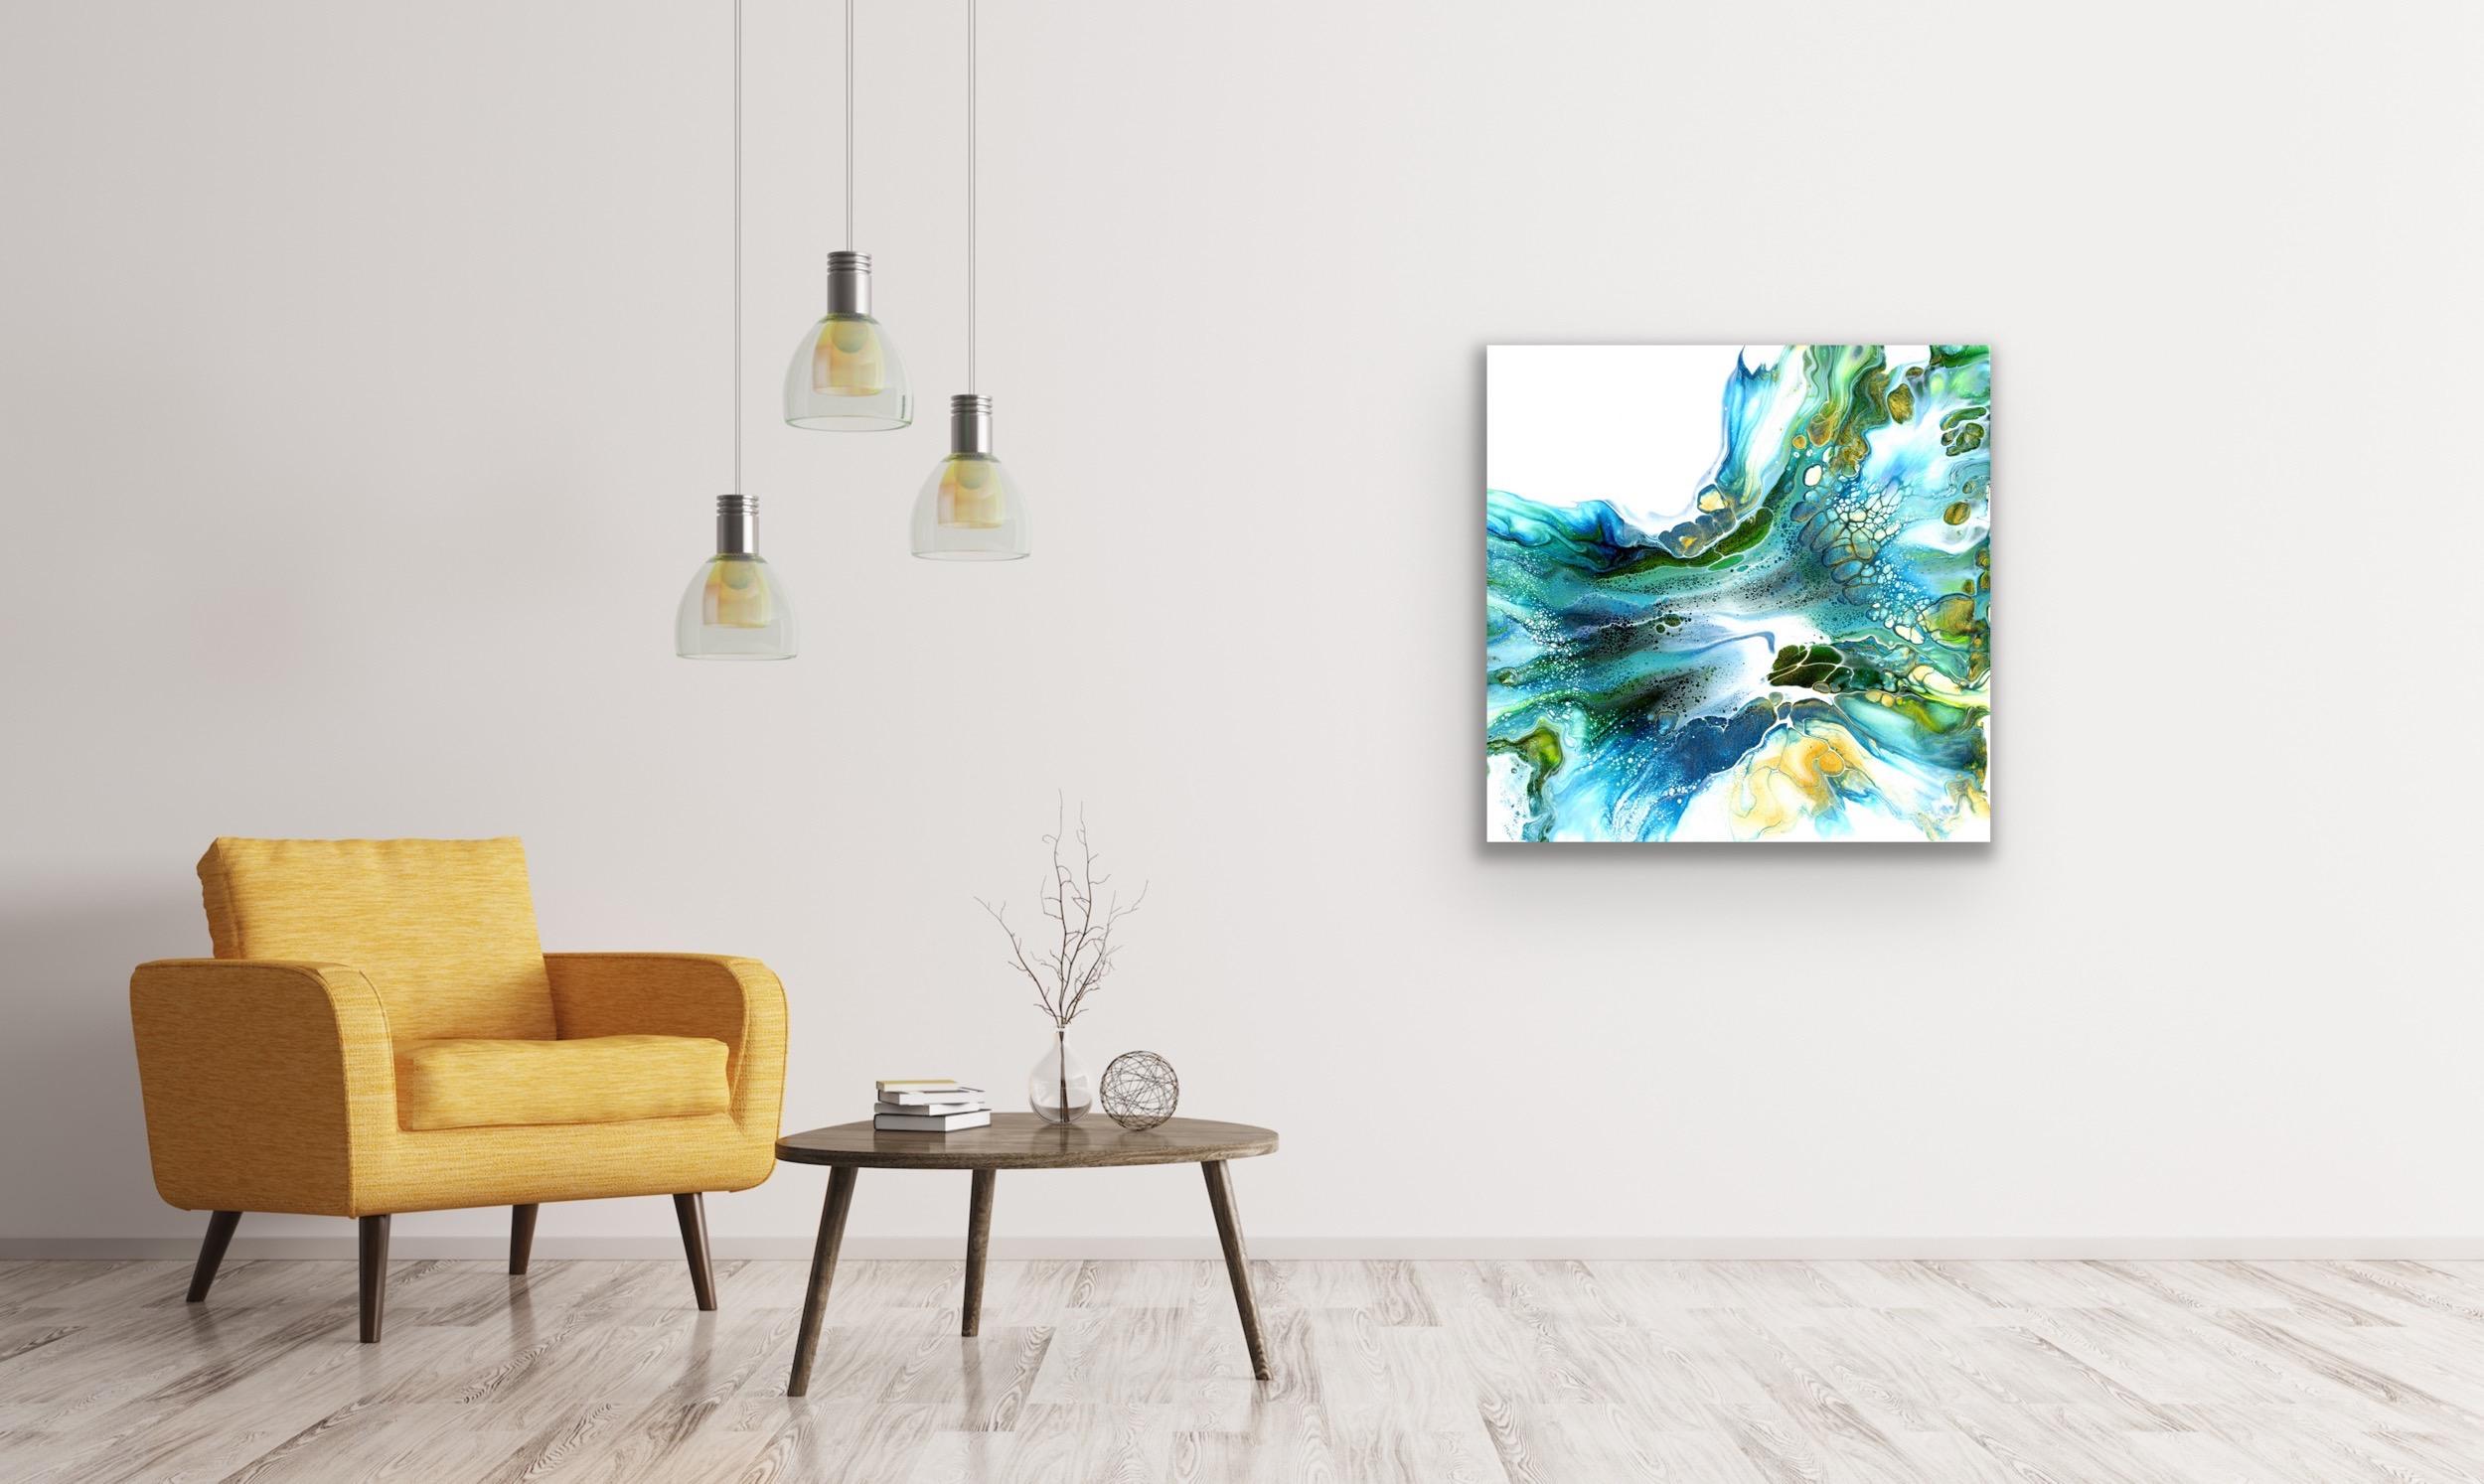 Contemporary Modern Abstract, Giclee Print on Metal, Limited Edition, by Cessy  1